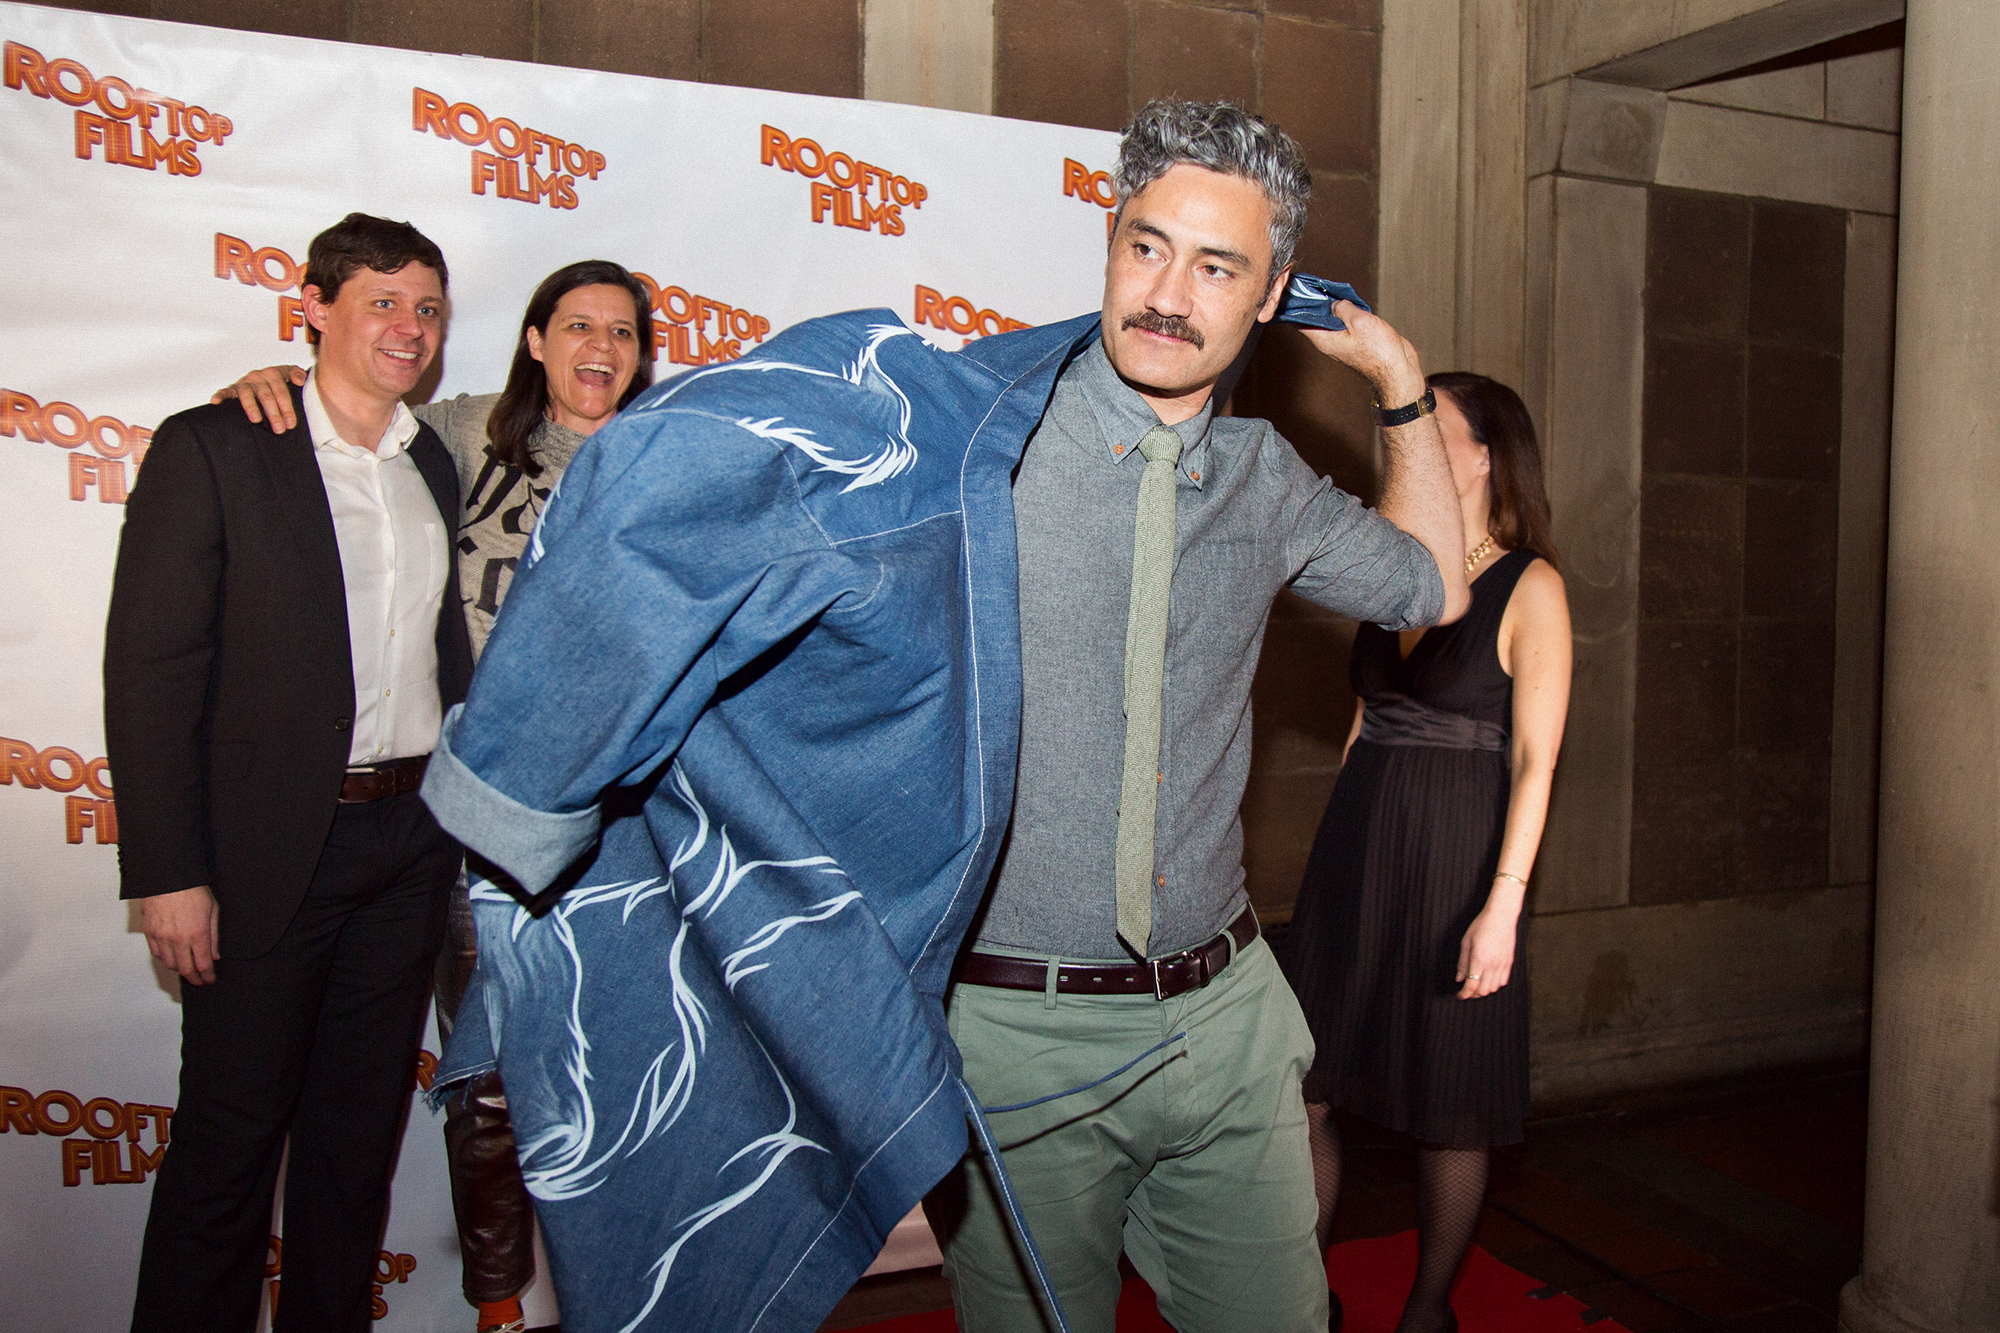 Taika Waititi with Dan Nuxoll, Kirsten Johnson, and Genevieve Hsiao-Yung DeLaurier